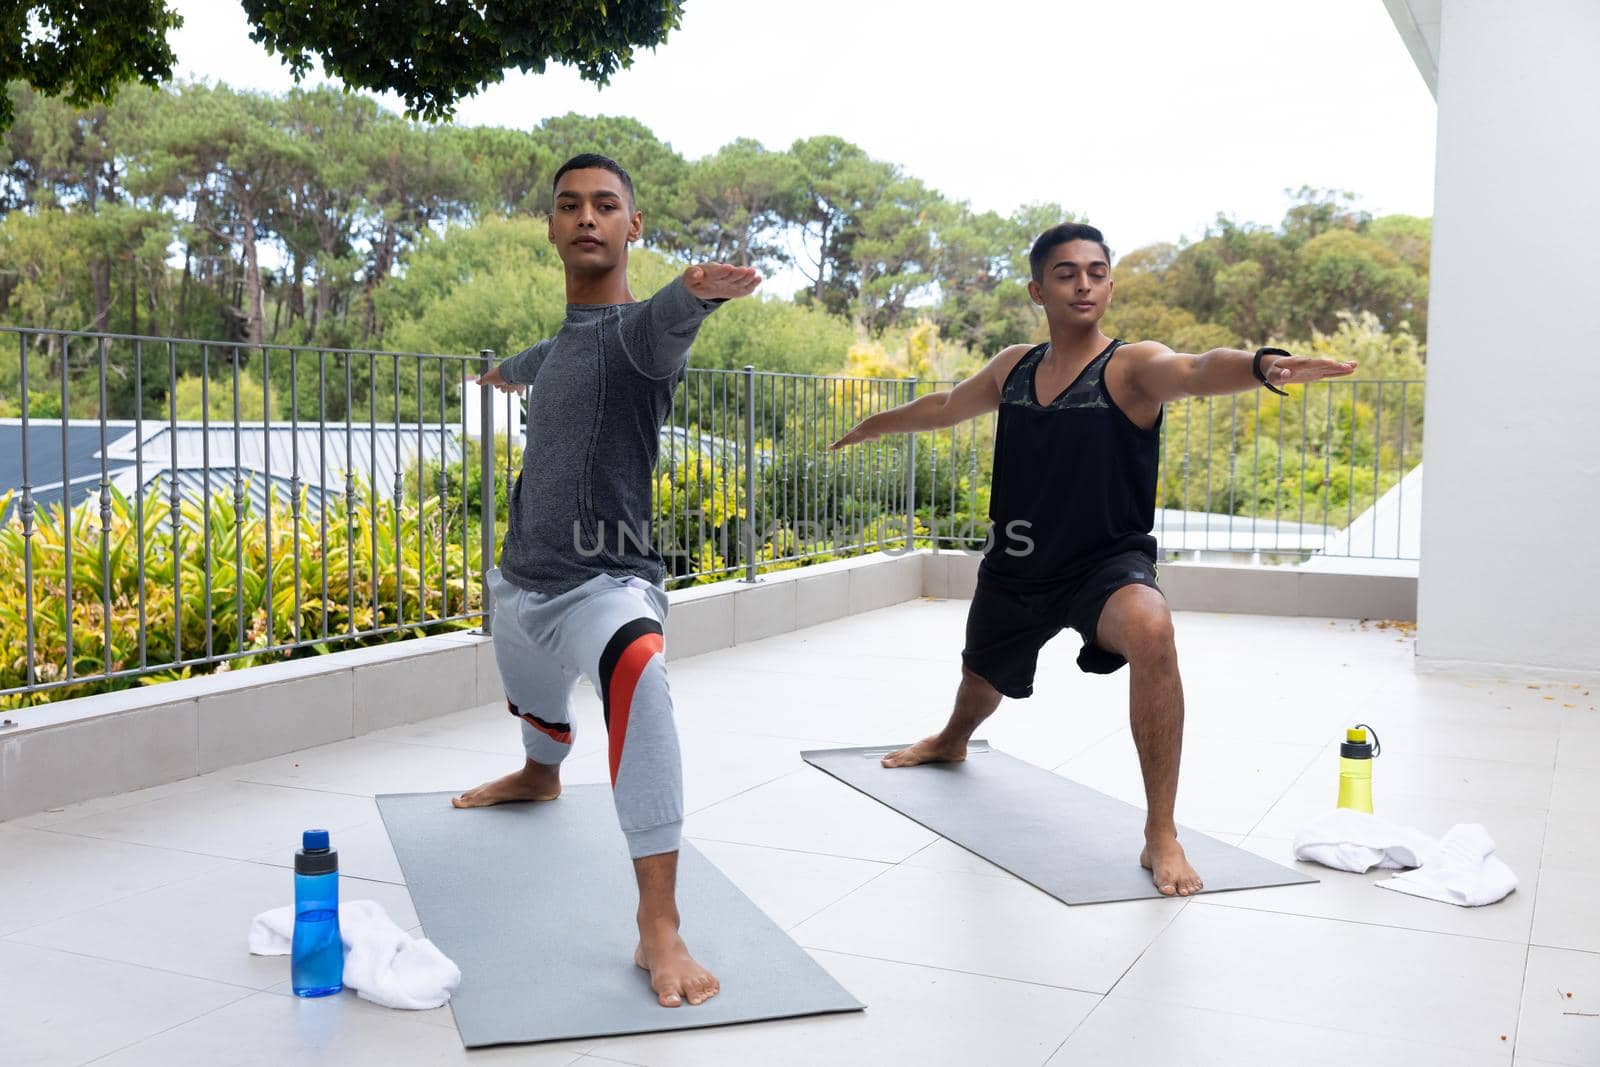 Diverse gay male couple practicing yoga on balcony. staying at home in isolation during quarantine lockdown.